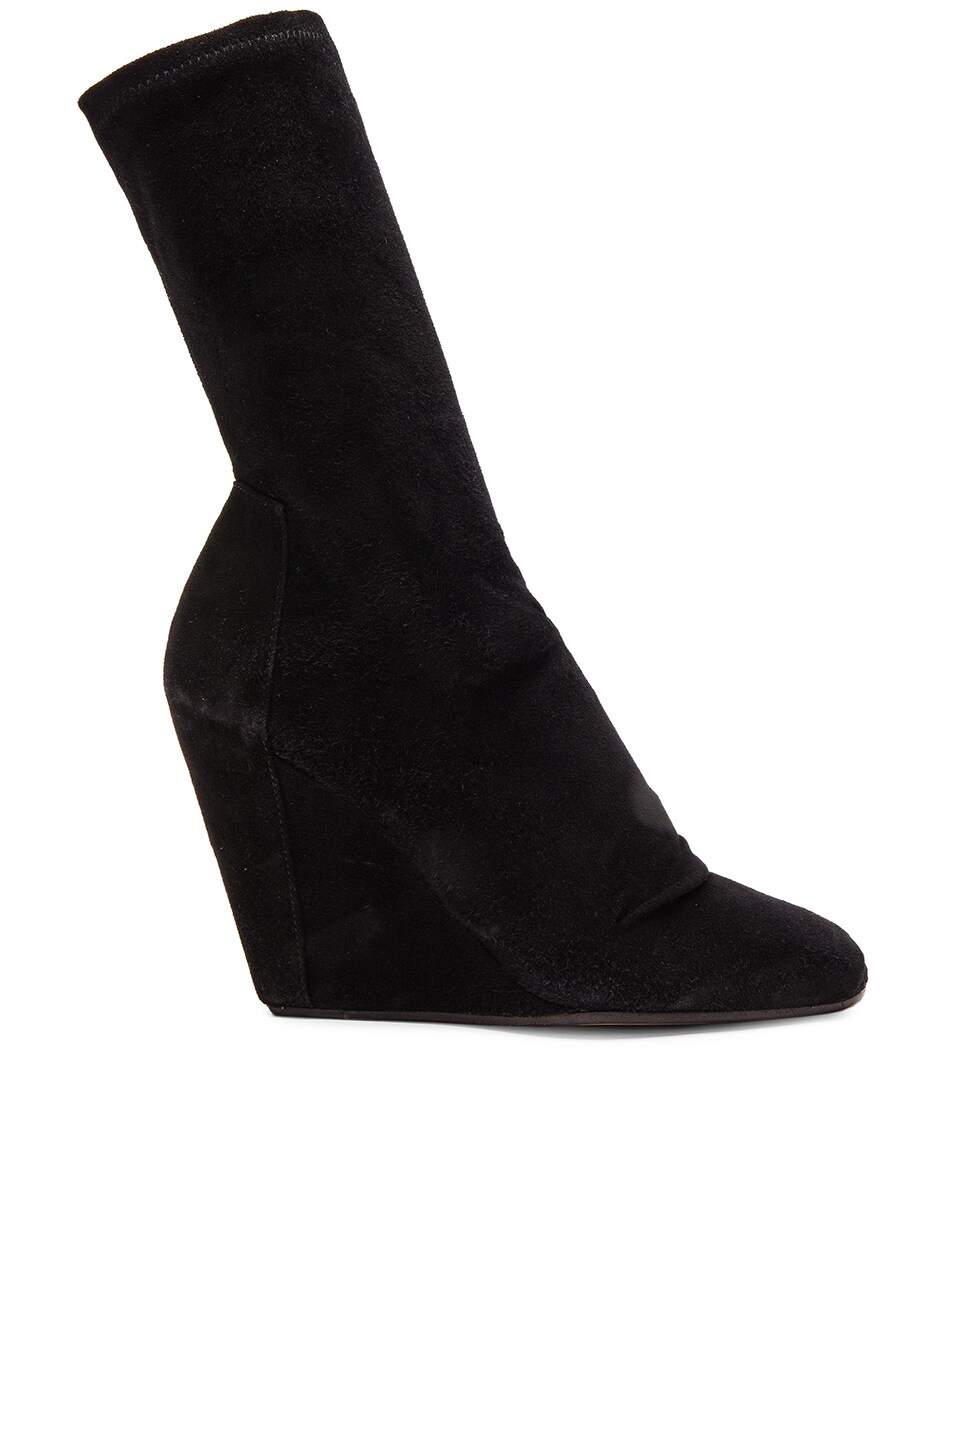 Image 1 of Rick Owens Stretch Wedge Open Toe Boots in Black